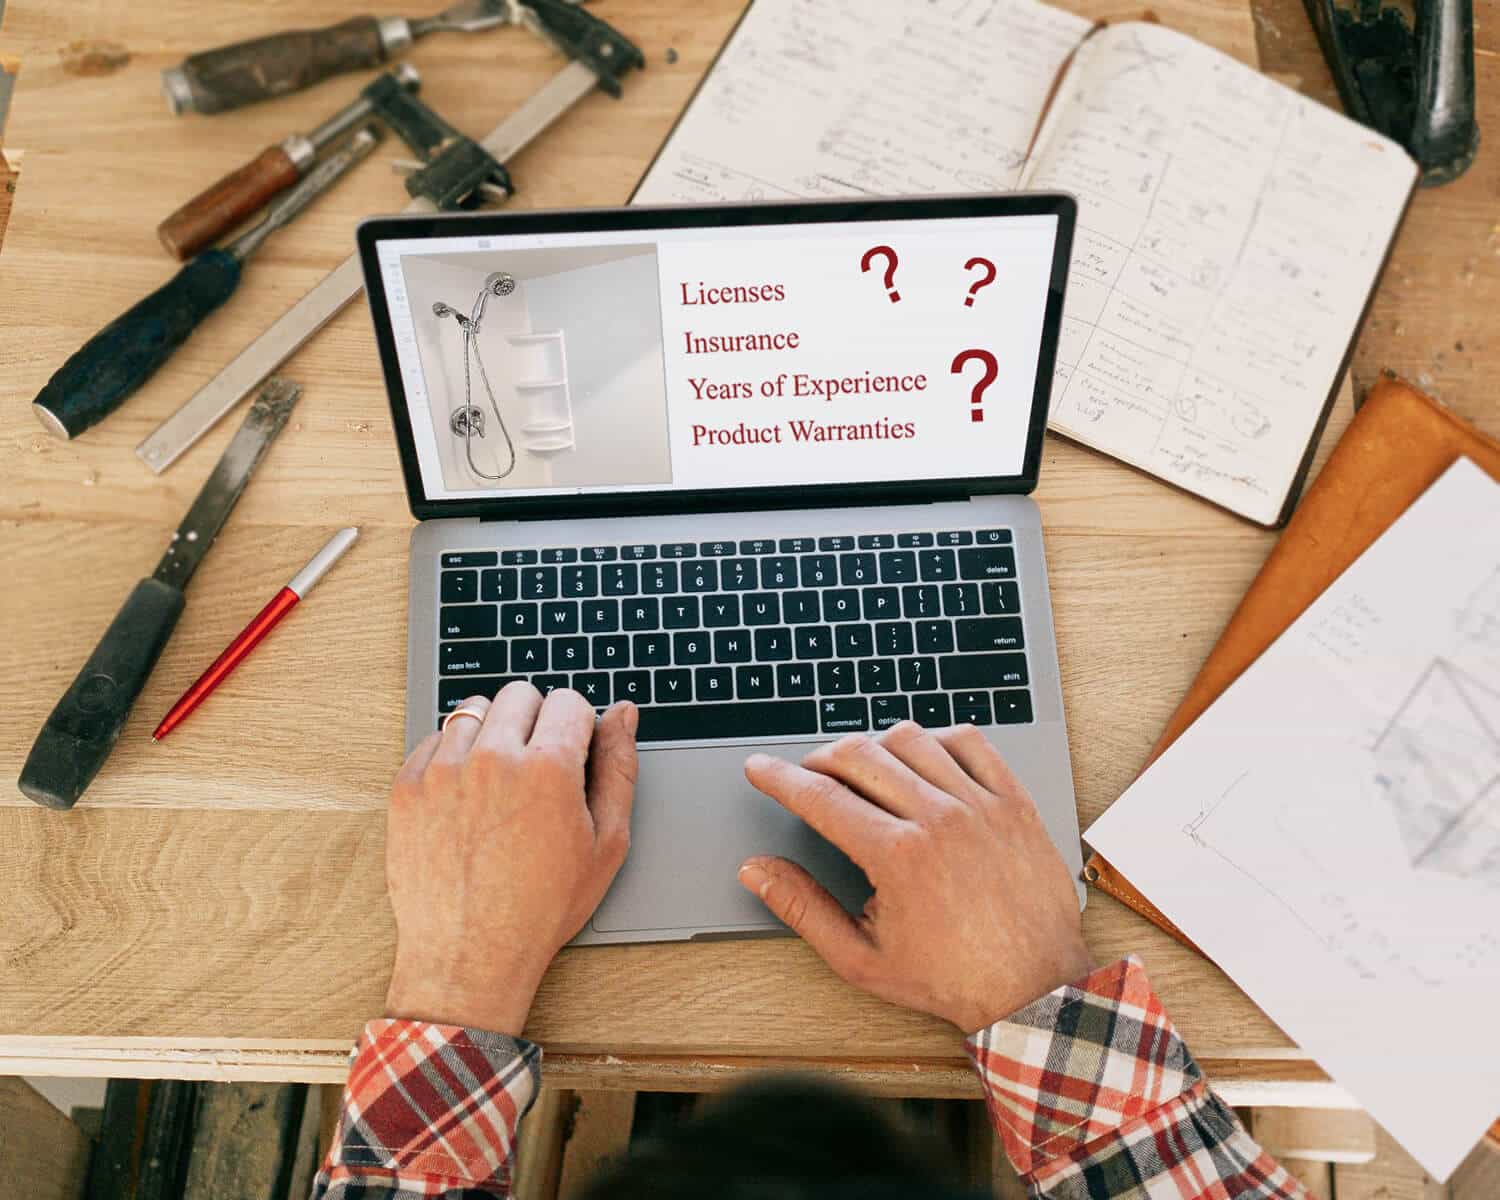 Important Questions to Ask Your Remodeler - Pictured is a laptop sitting on a wooden desk. The laptop is surrounded by written construction notes and tools.